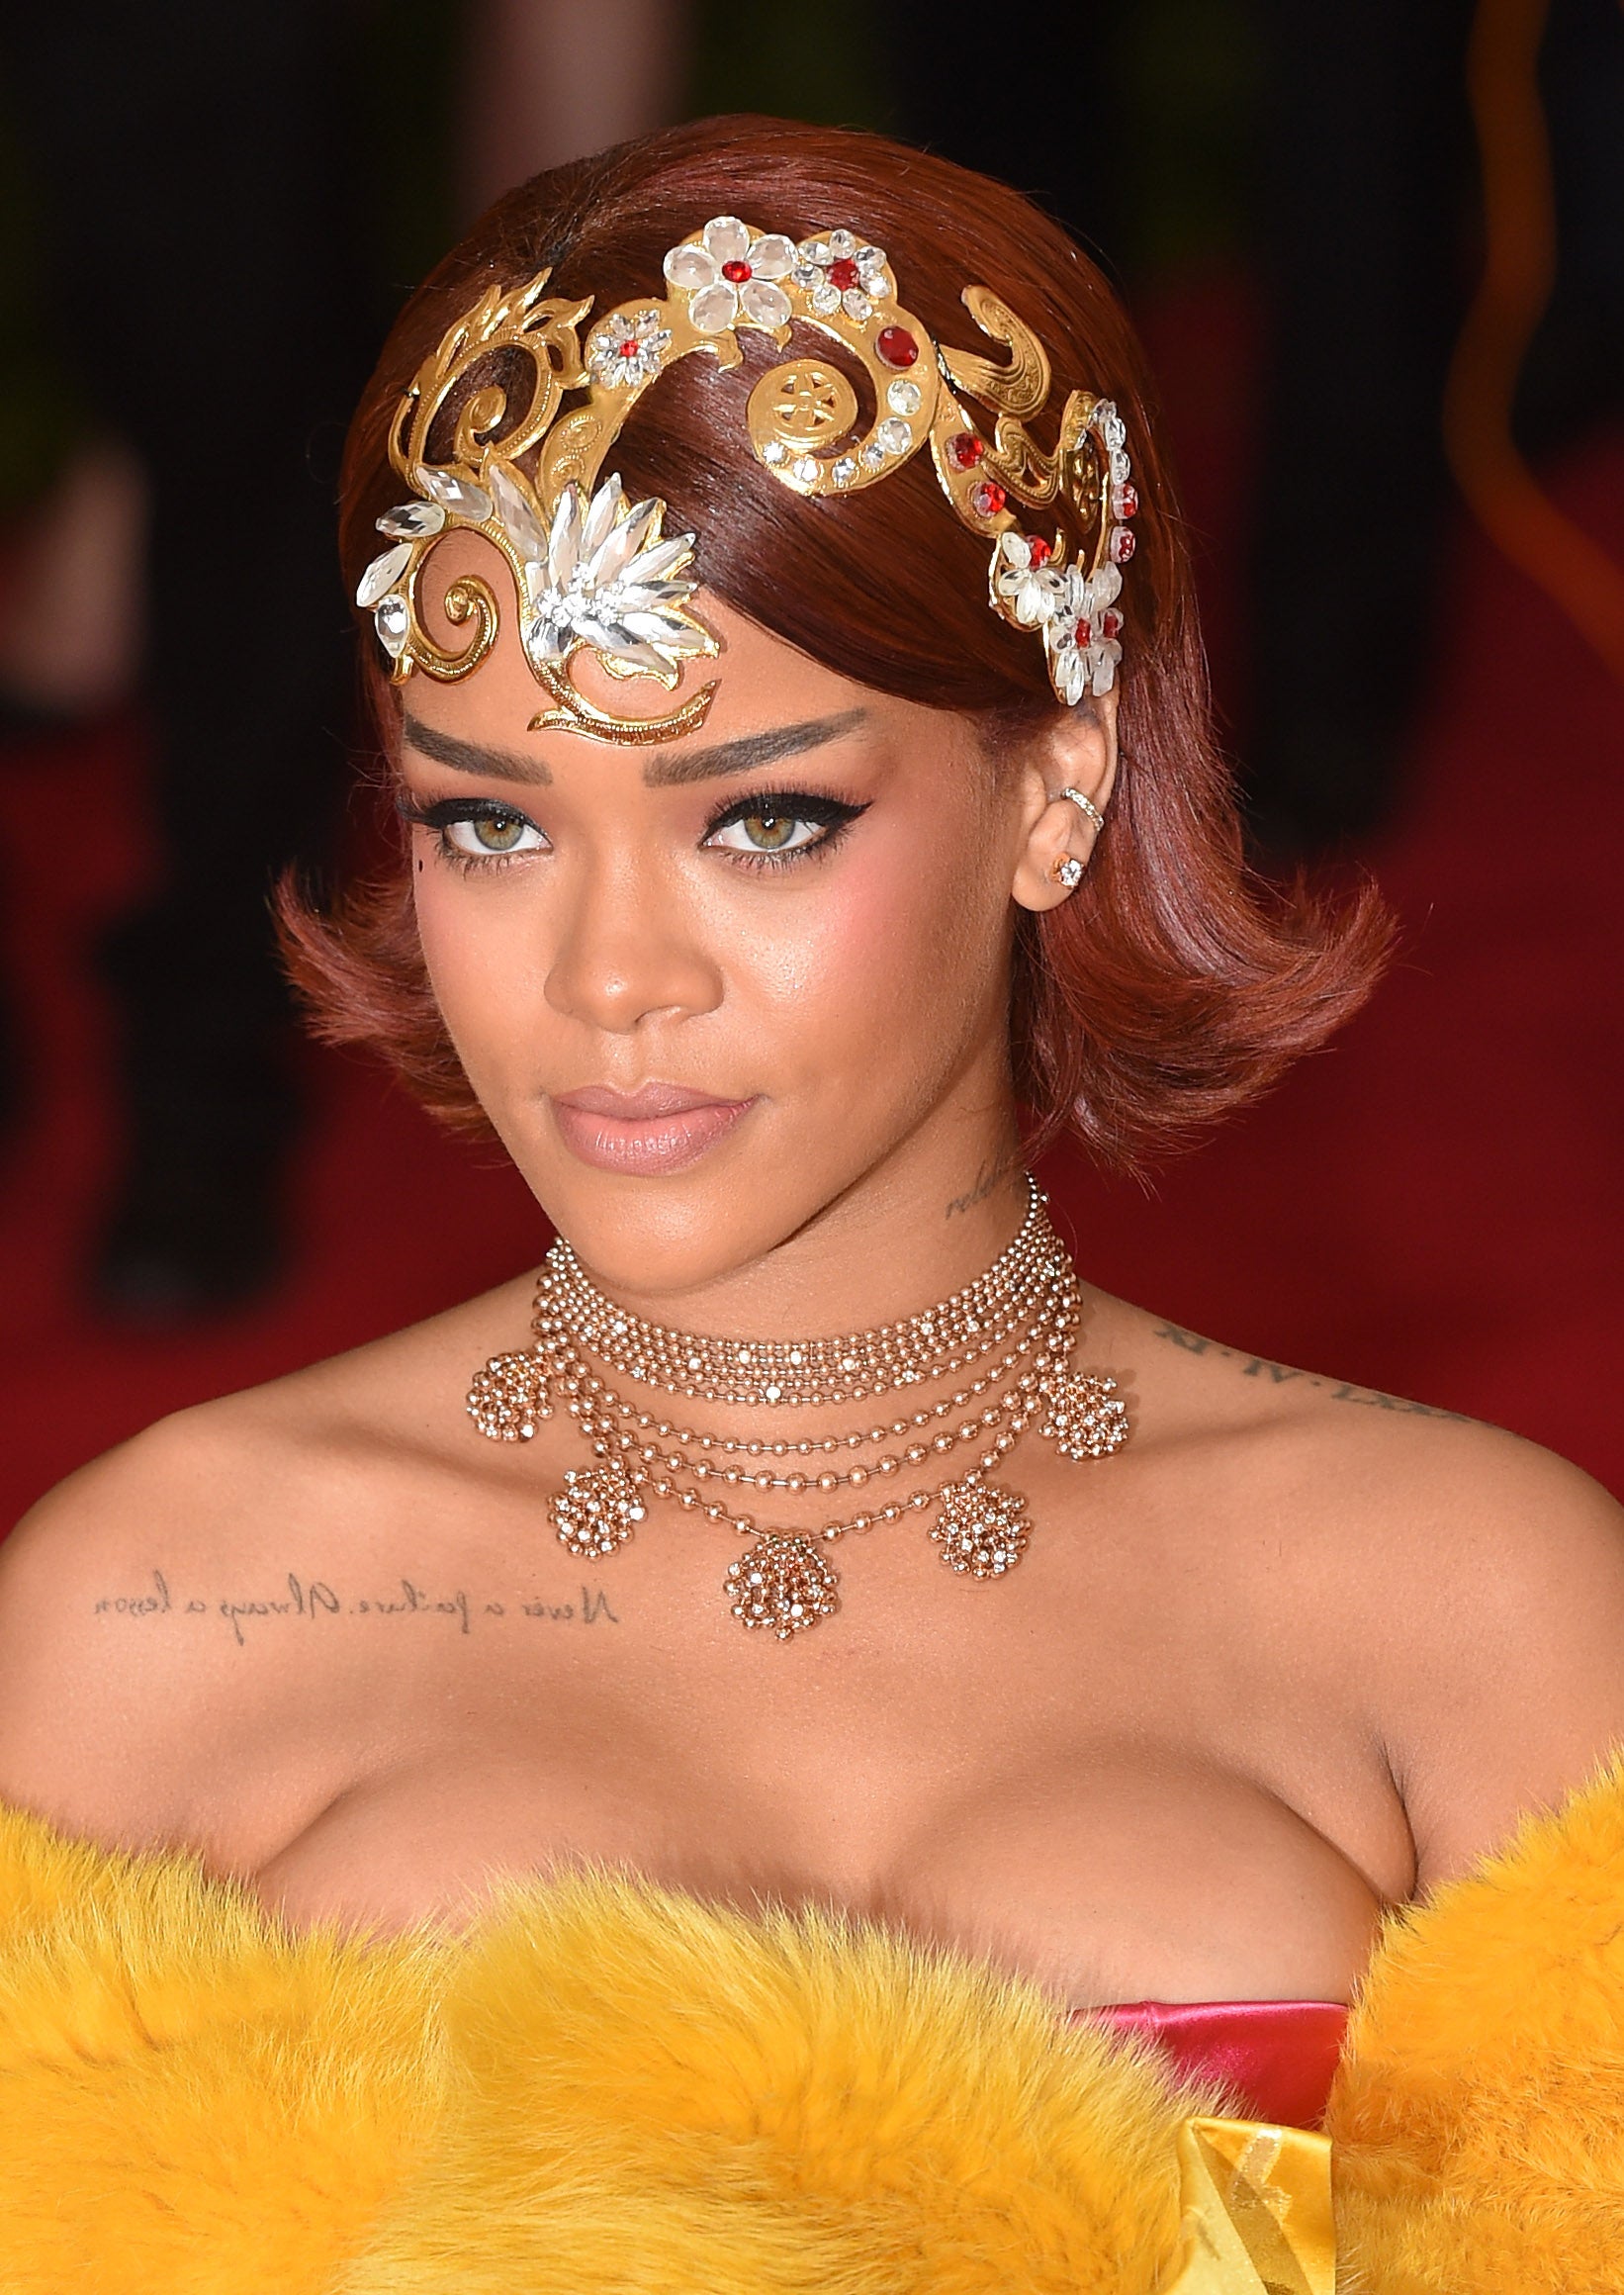 Rihanna’s Clara Lionel Foundation’s ‘The Dollar Campaign’ Gives Fans The Chance To Attend Her Annual Diamond Ball